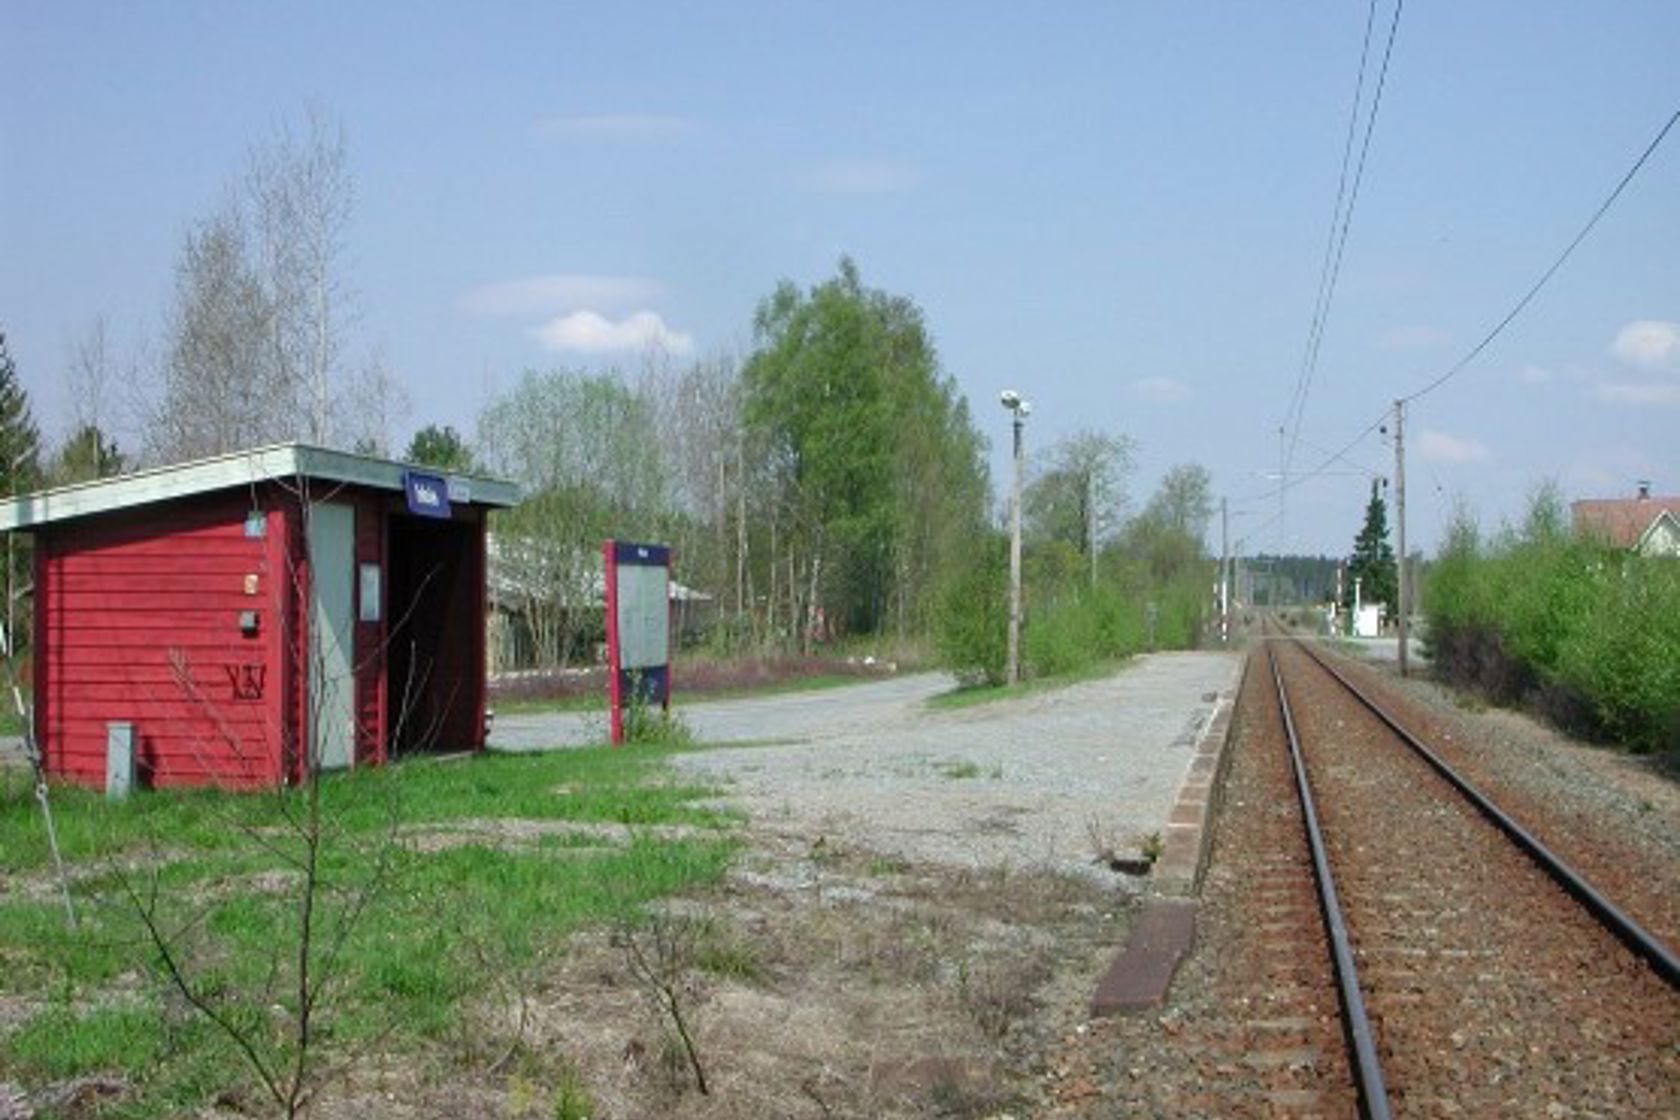 Exsterior view of Heia station